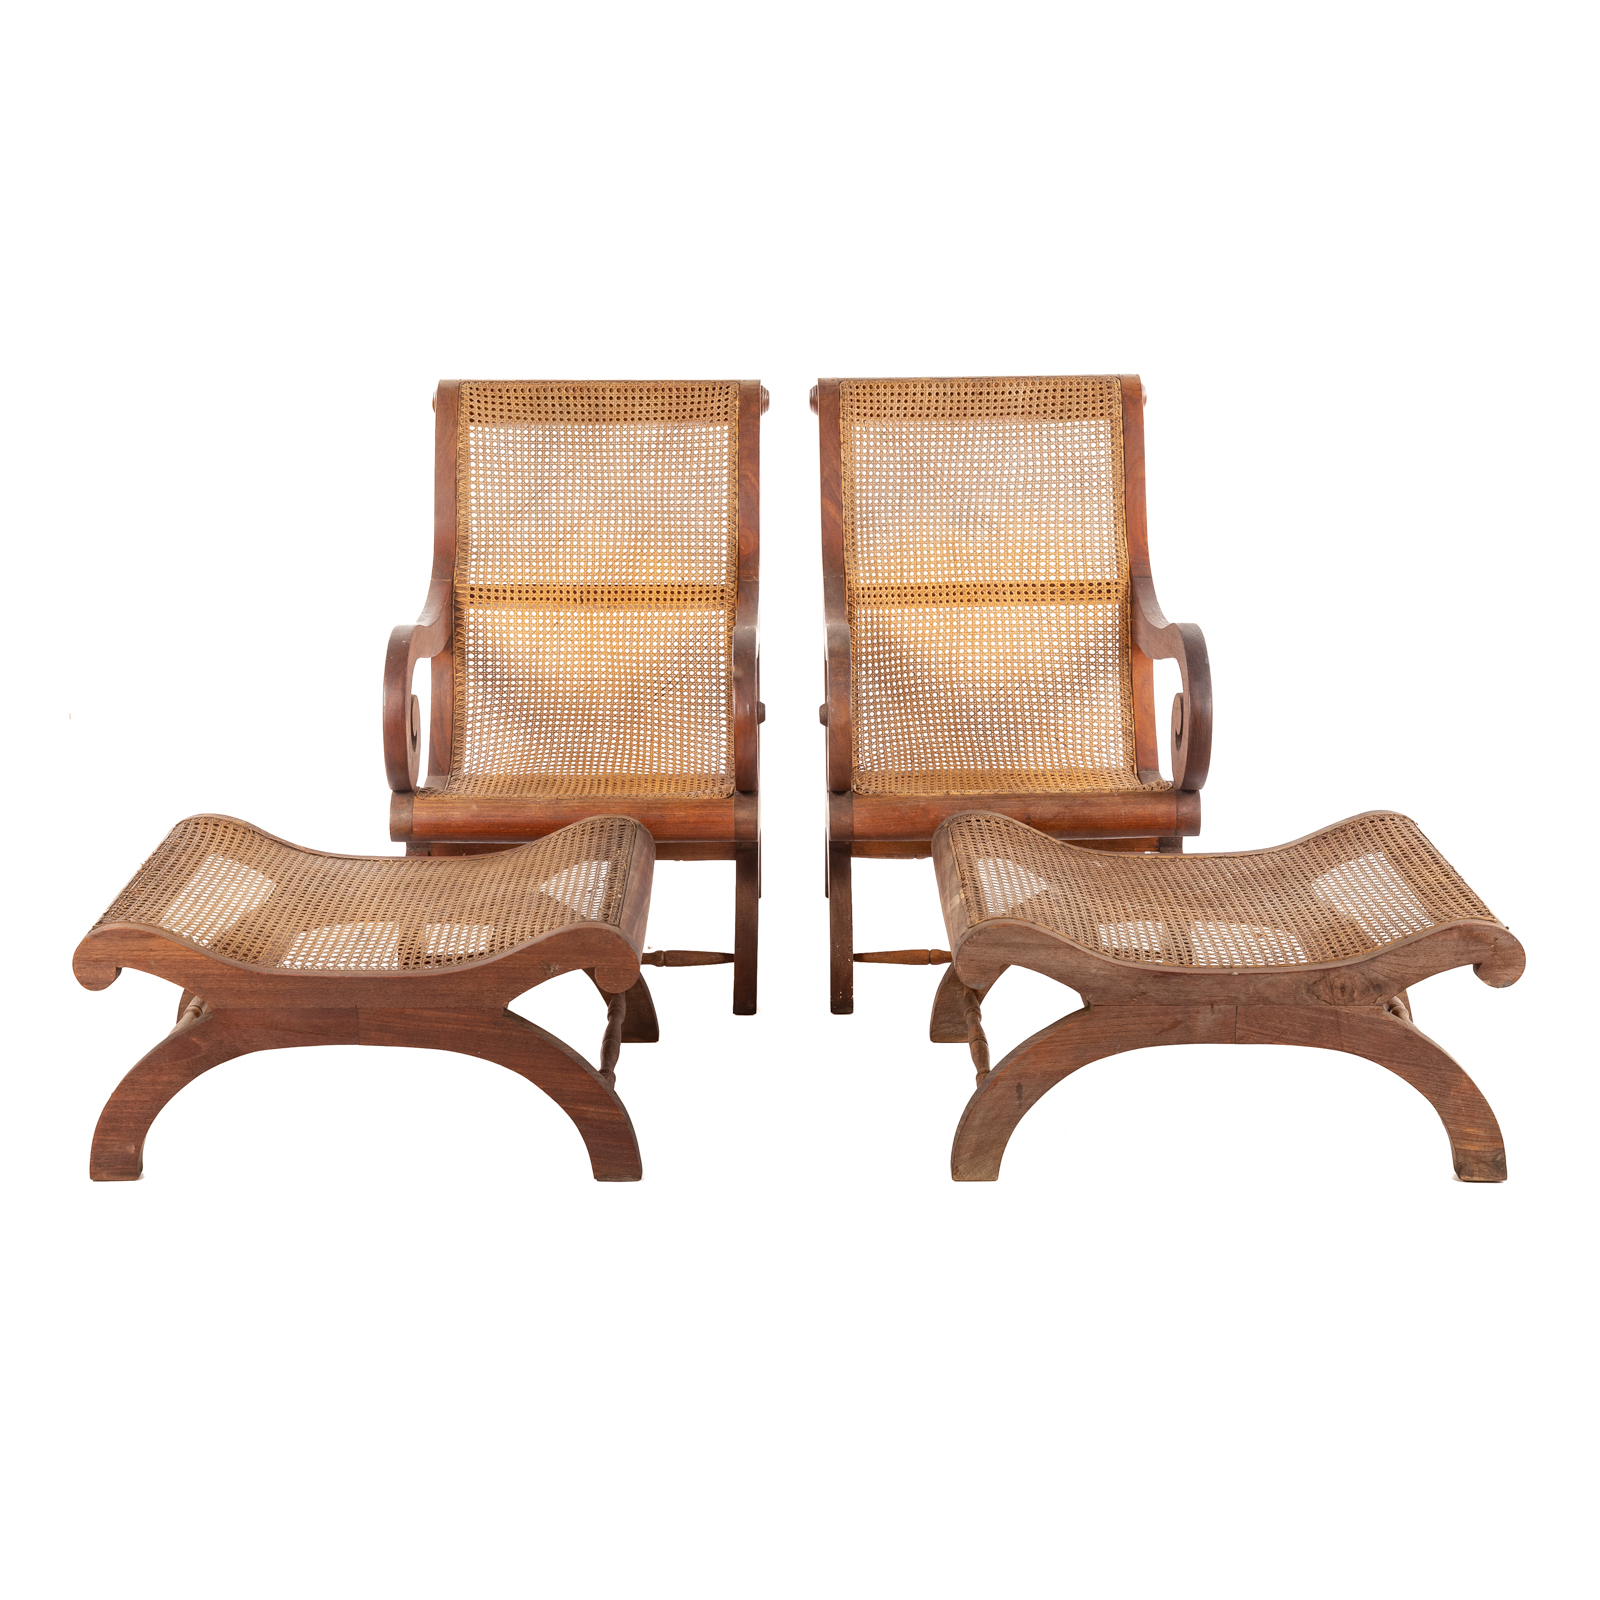 A PAIR OF BAUER CAMPECHE CHAIRS 2e9937